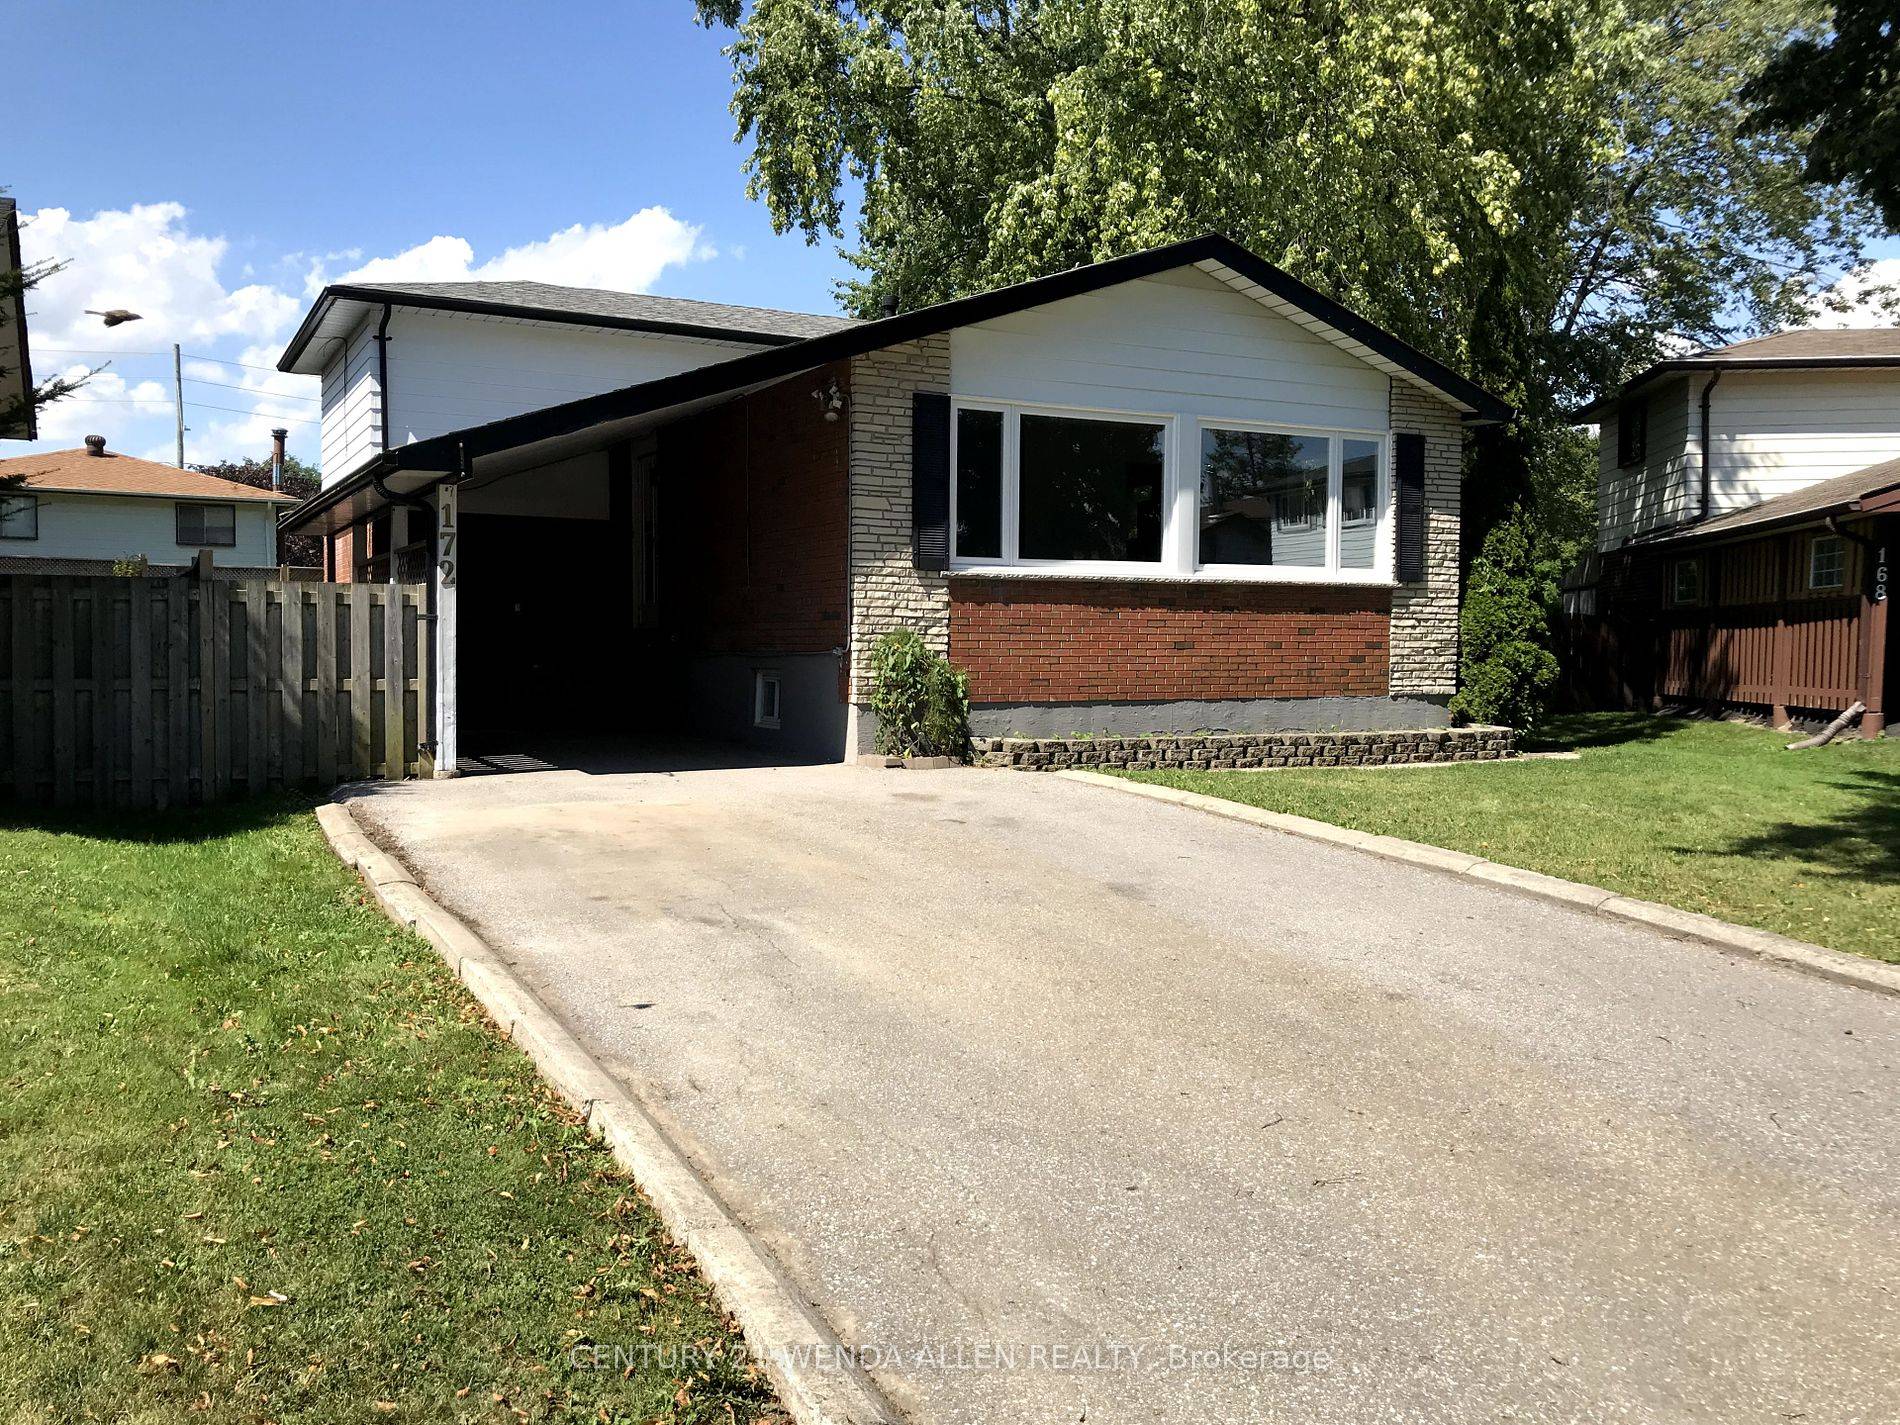 Welcome to this Fantastic Legal Duplex Located on a Quiet Cul de sac in South Oshawa.